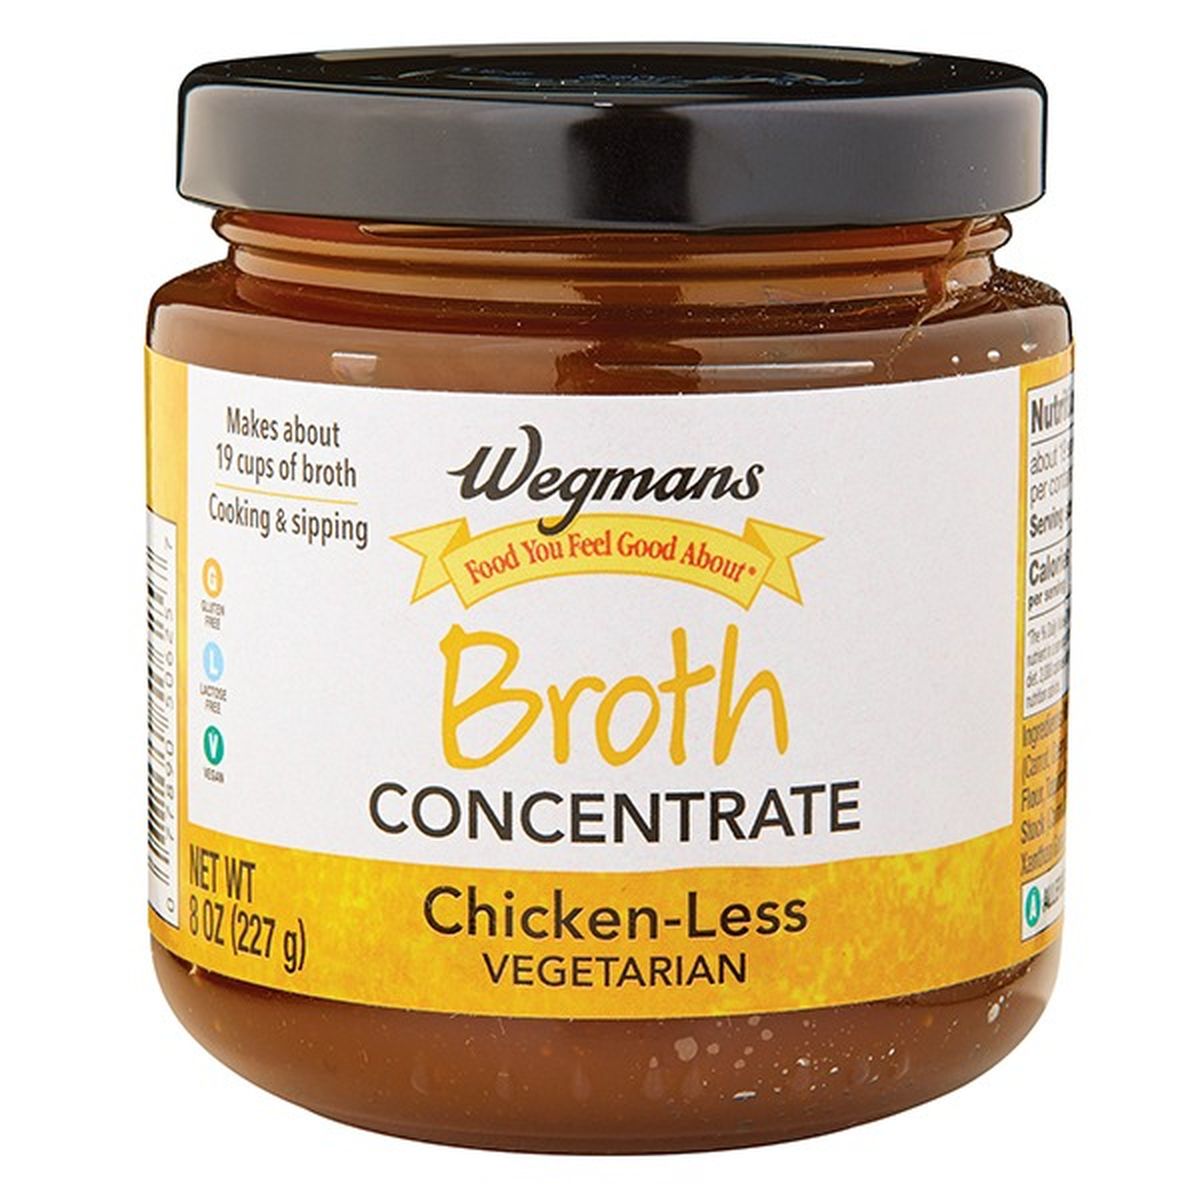 Calories in Wegmans Chicken-Less Broth Concentrate